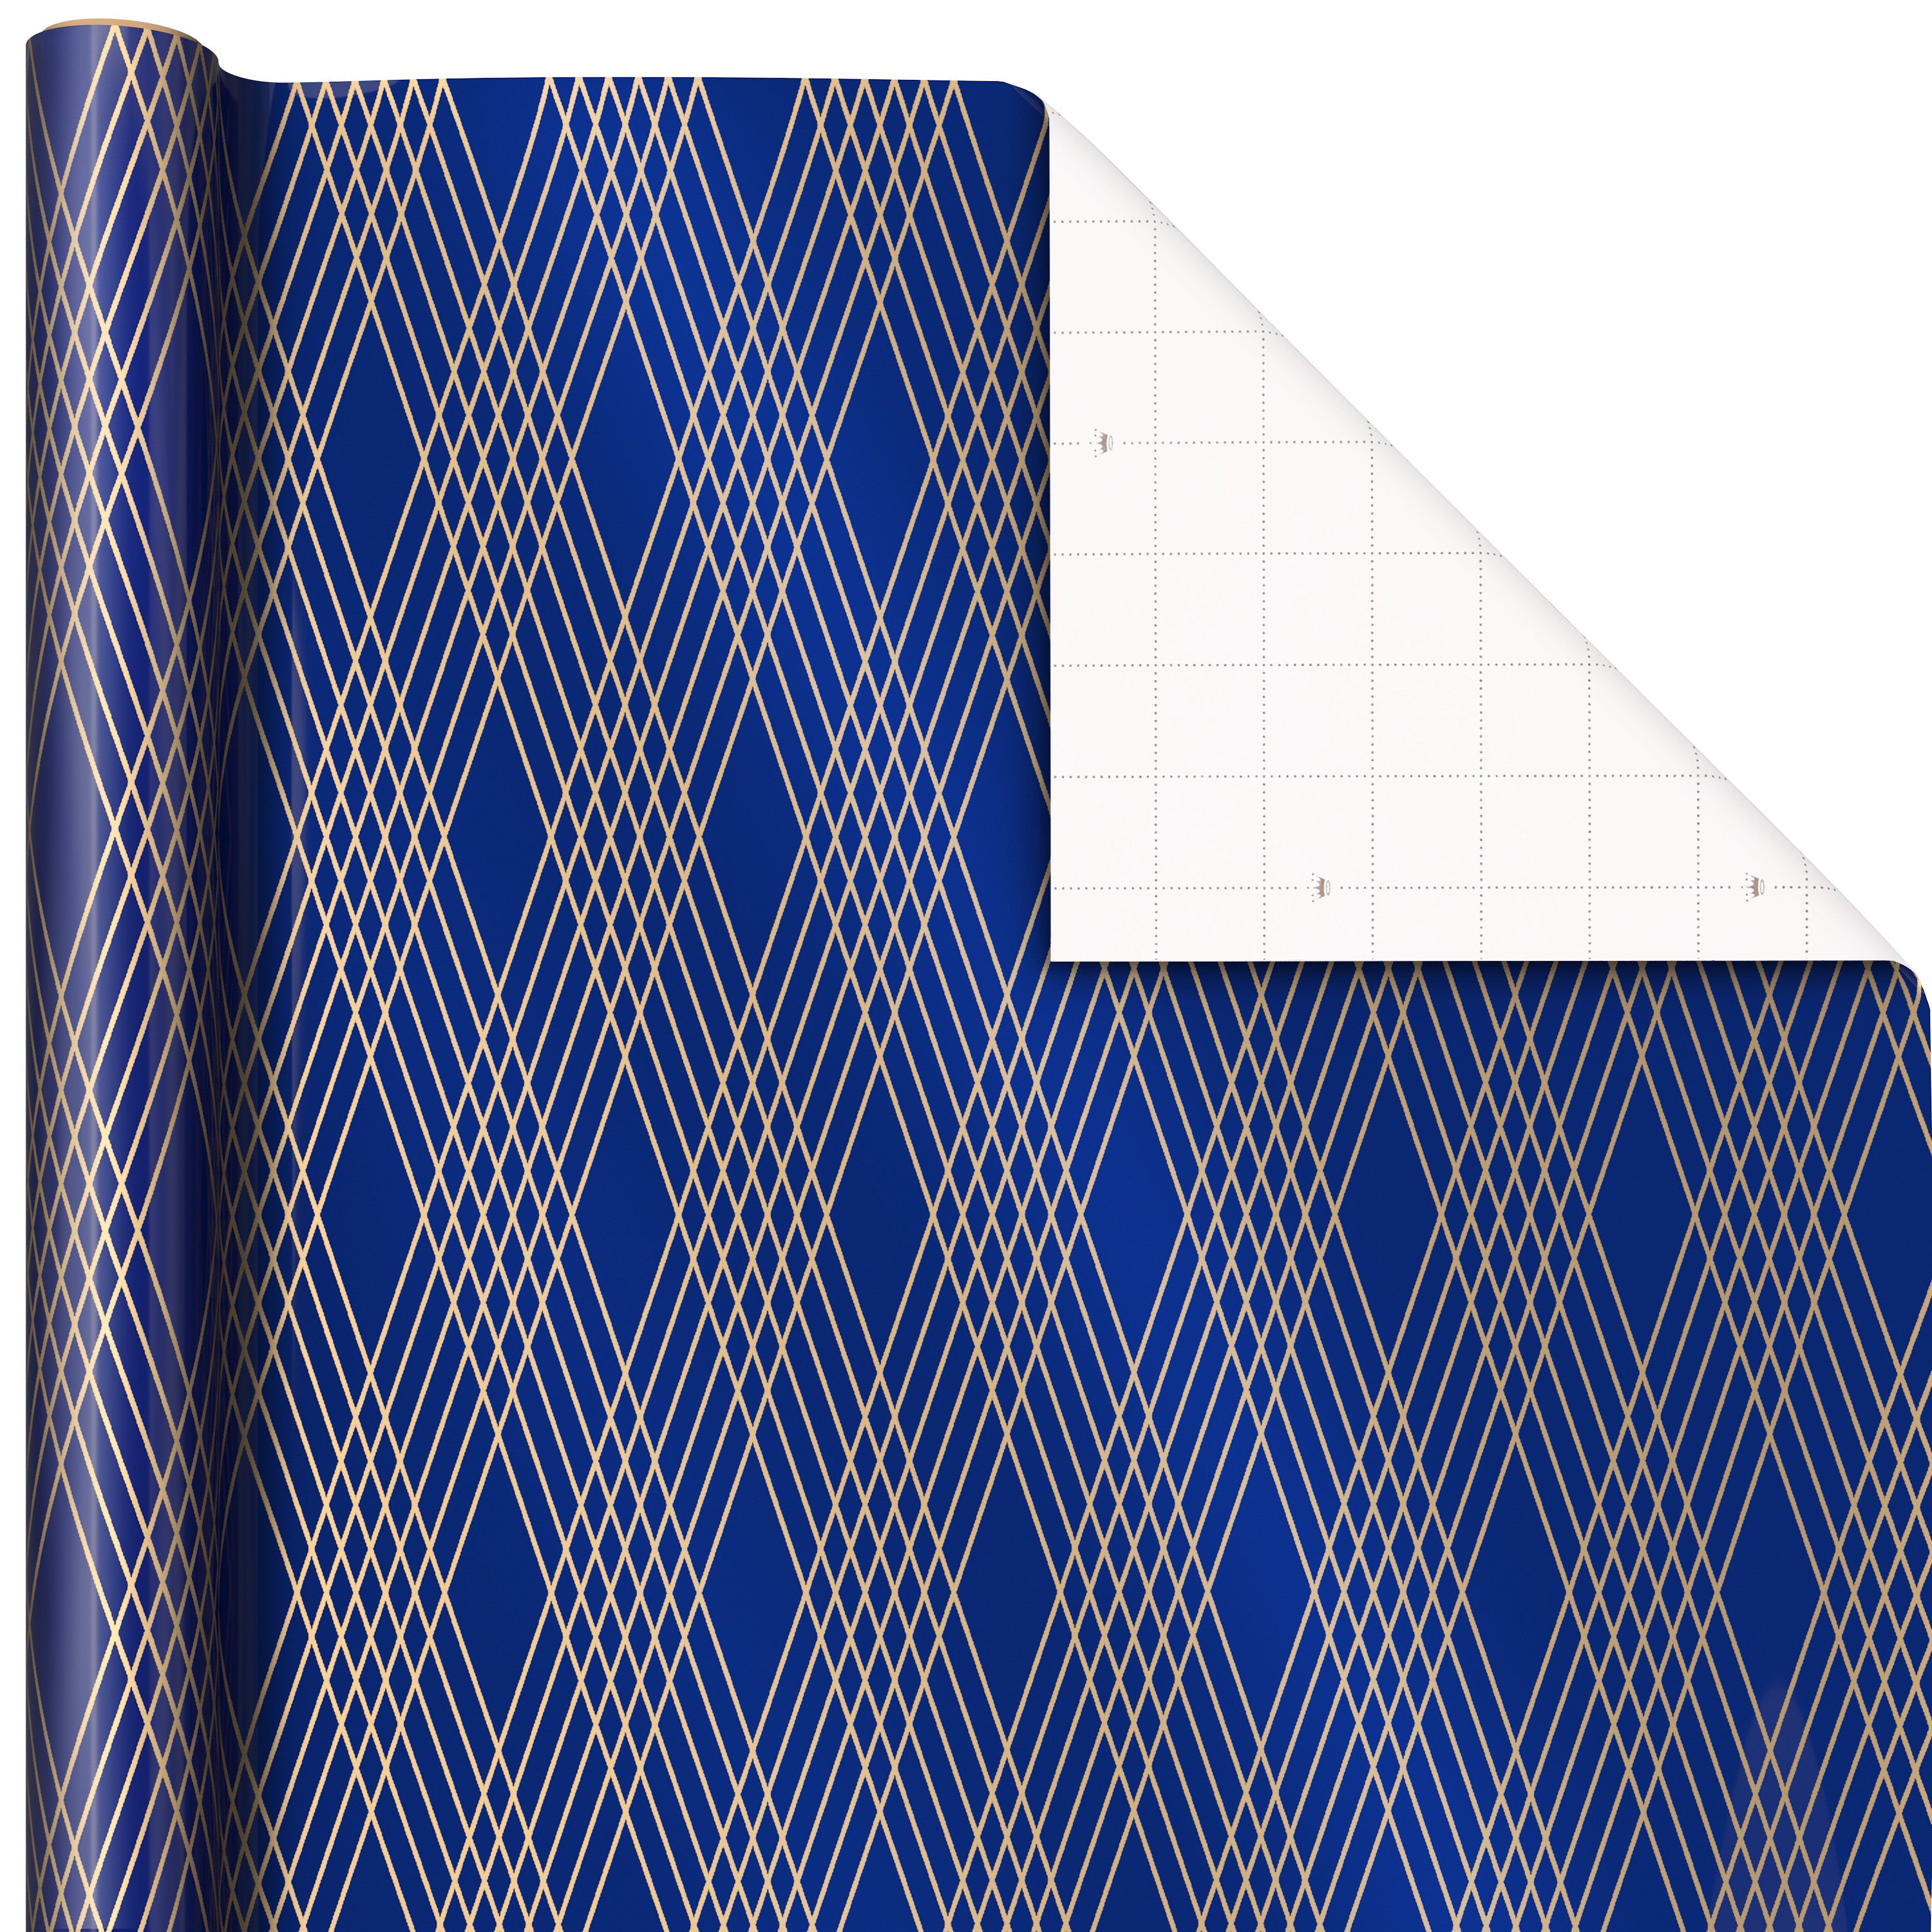 Hallmark All Occasion Wrapping Paper Bundle with Cut Lines on Reverse - Dark Blue and Gold (3-Pack: 105 sq. ft. ttl.) for Birthdays, Weddings, Valentine's Day, Graduations, Father's Day